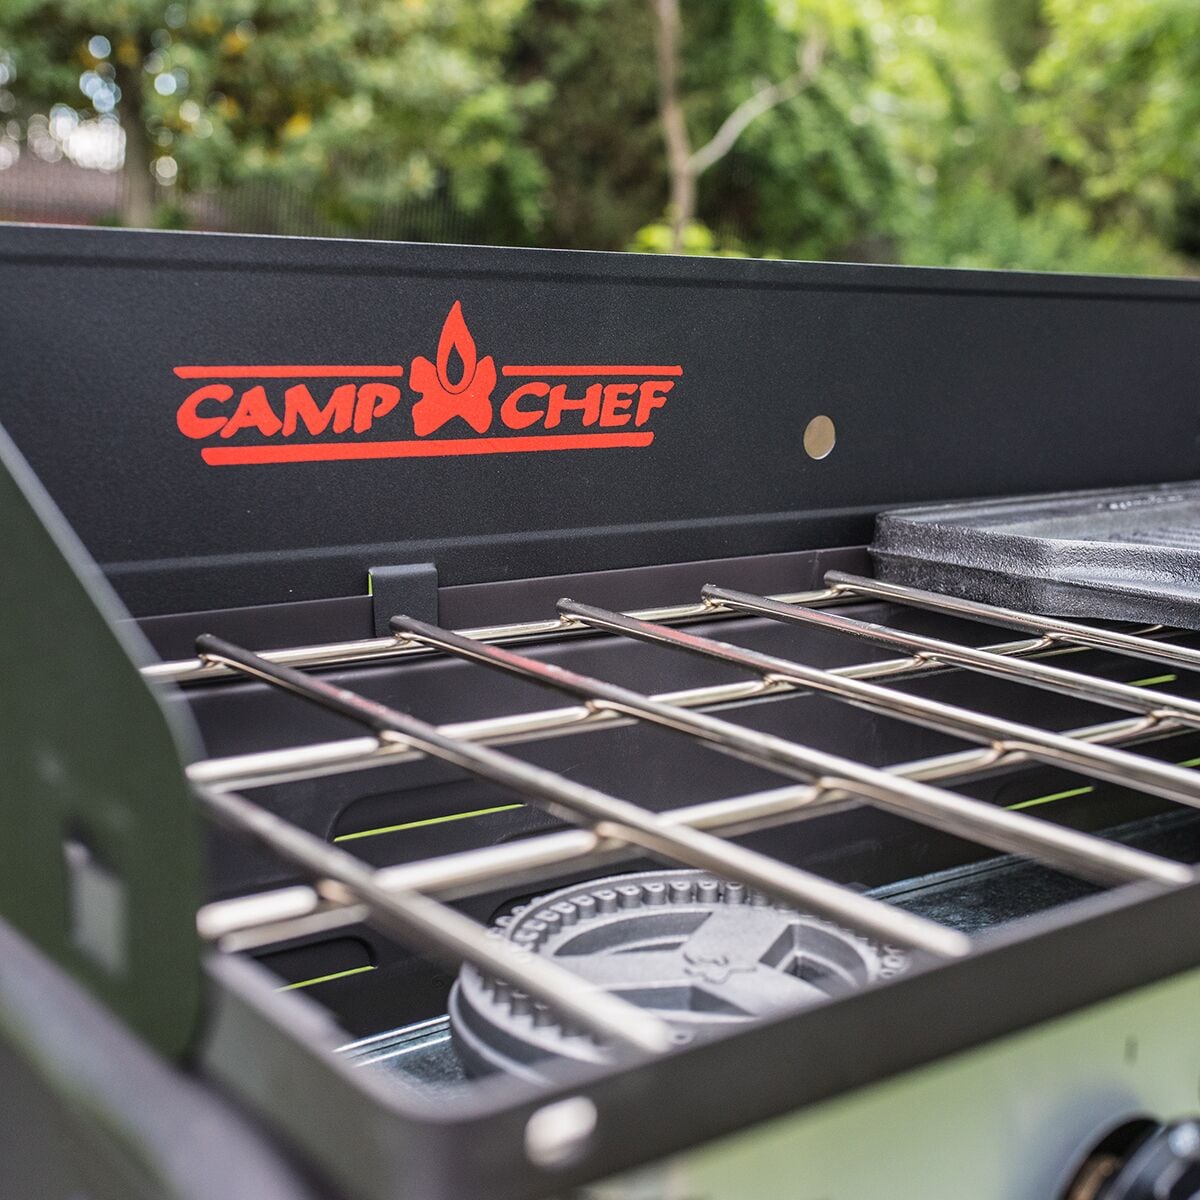 Camp Chef Oven vs Coleman Oven